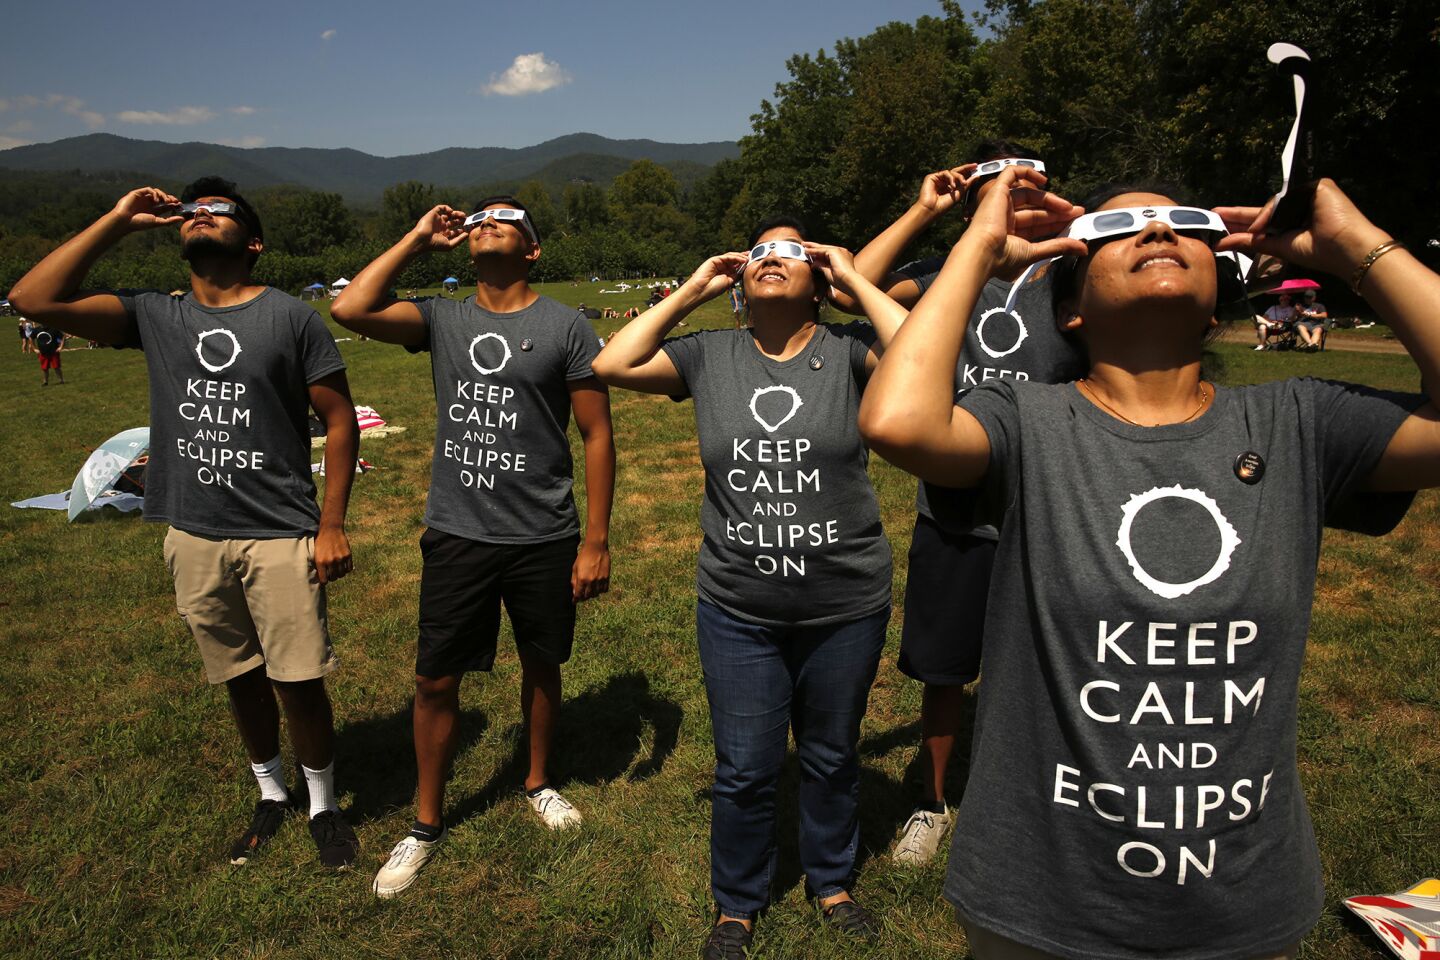 Views of the solar eclipse from across the U.S.